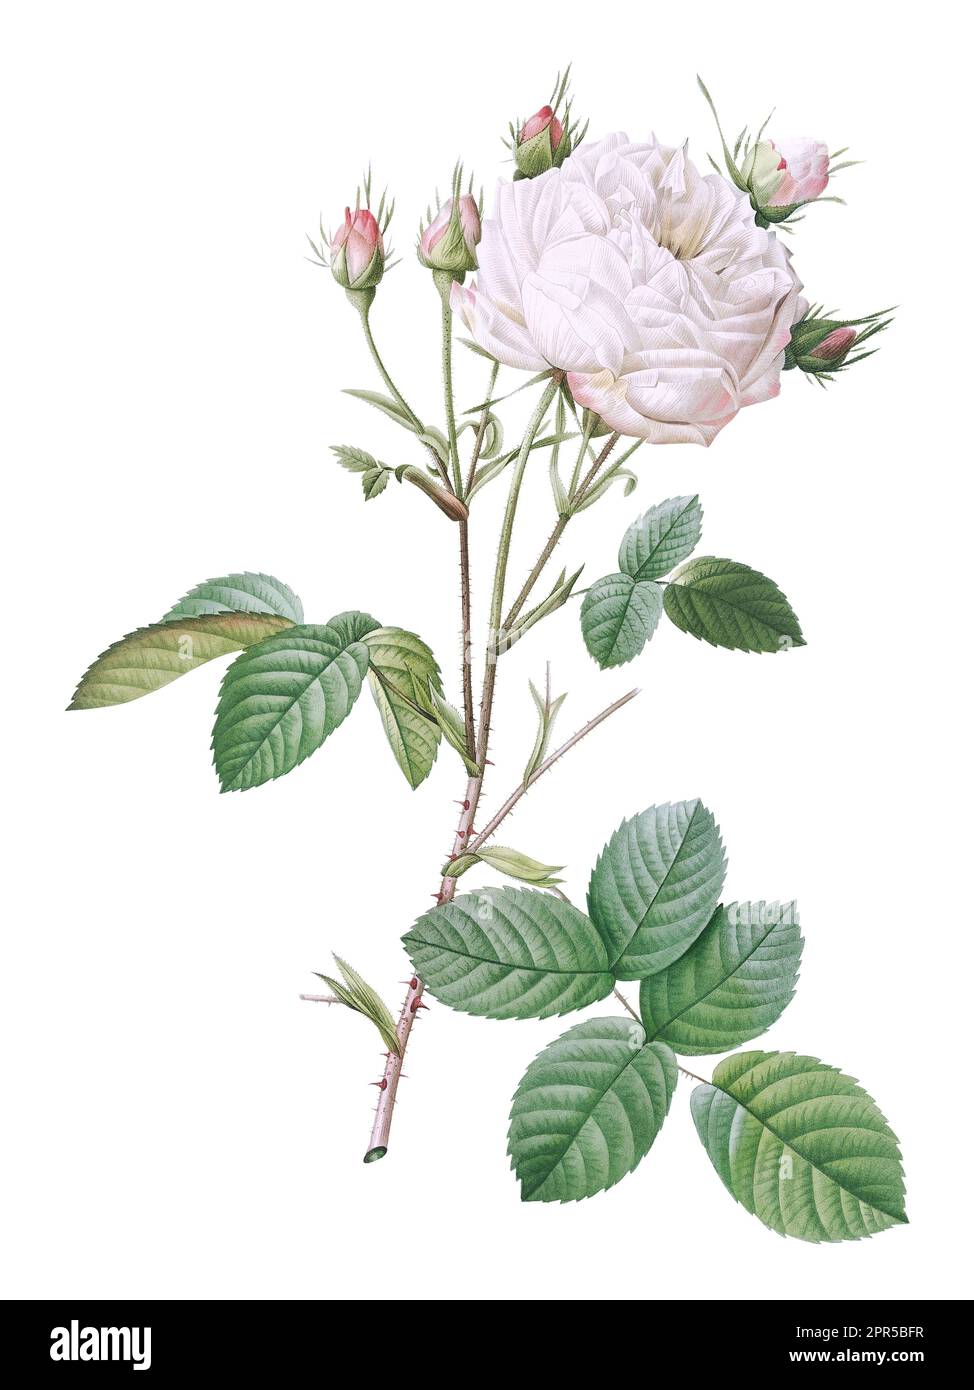 A vibrant, close-up illustration of a single rose featuring soft pink petals and healthy green foliage, growing from a long stem Stock Photo